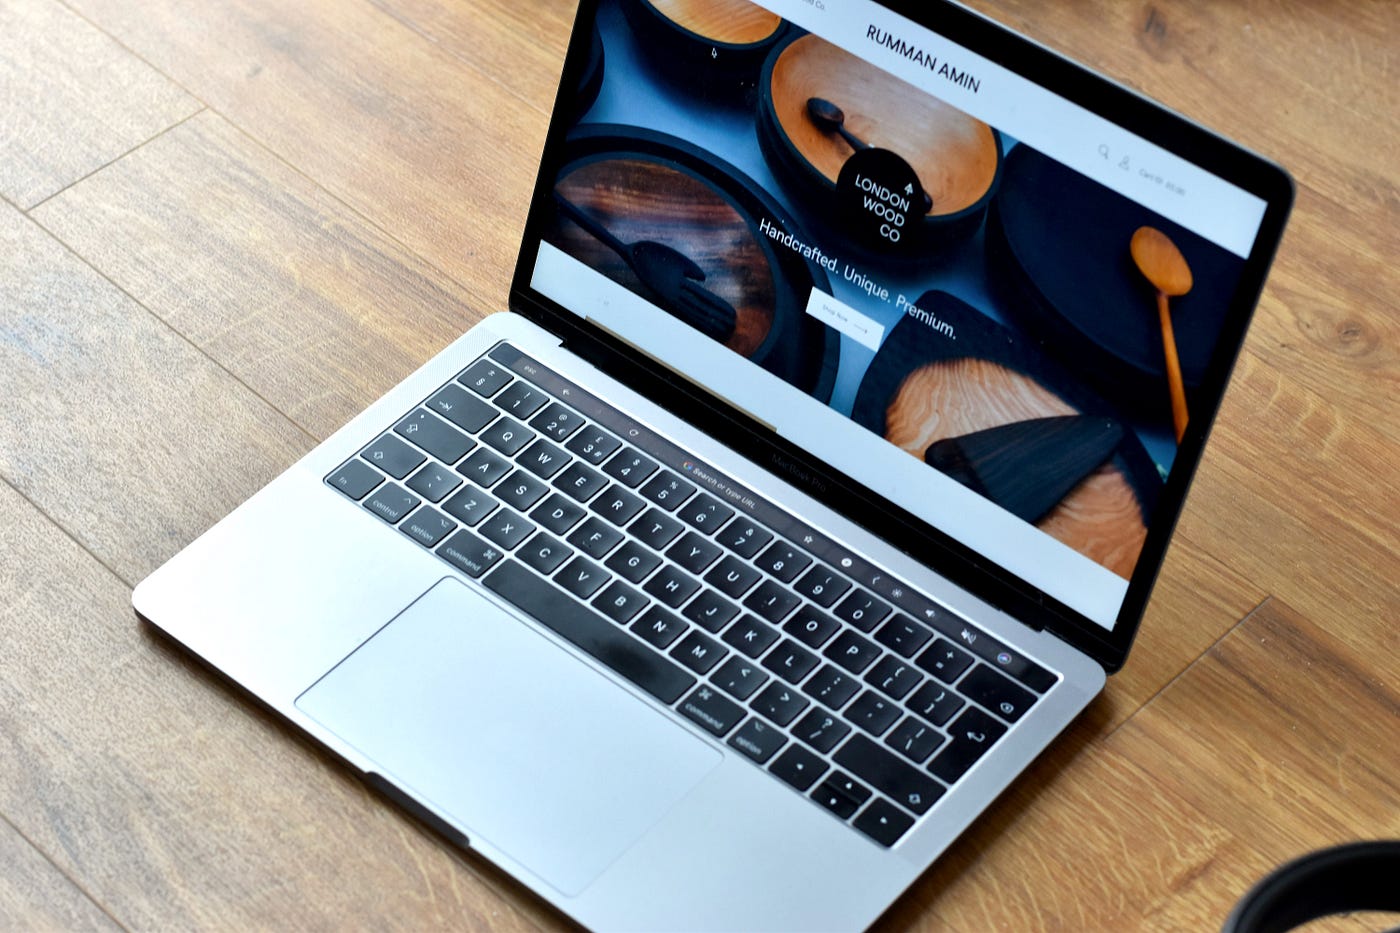 13-Inch MacBook Air With OLED Display Rumored to Launch in 2024 - MacRumors